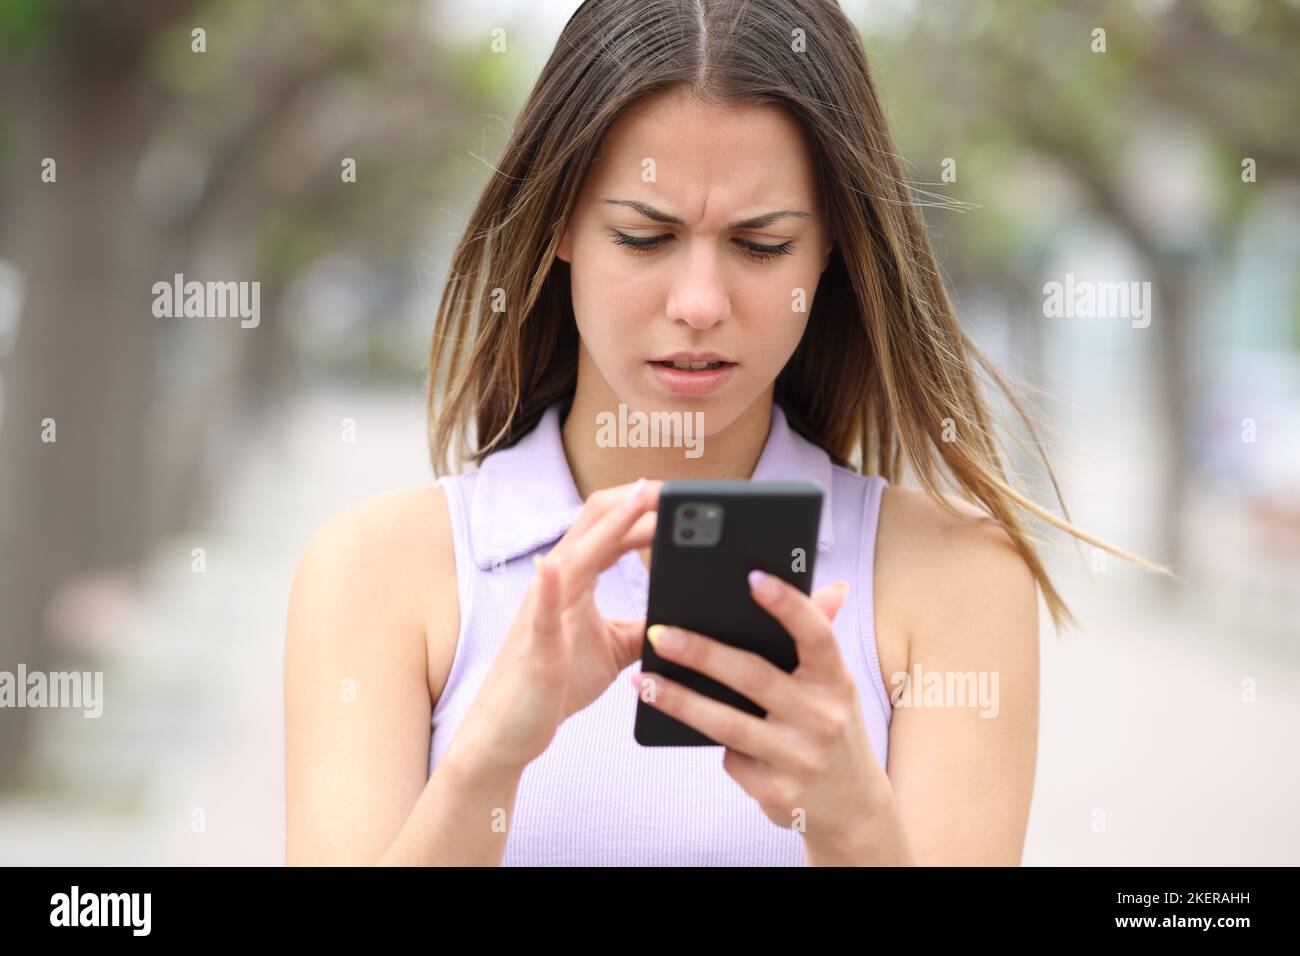 Front view portraif of a worried teen checking smart phone content walking in the street Stock Photo